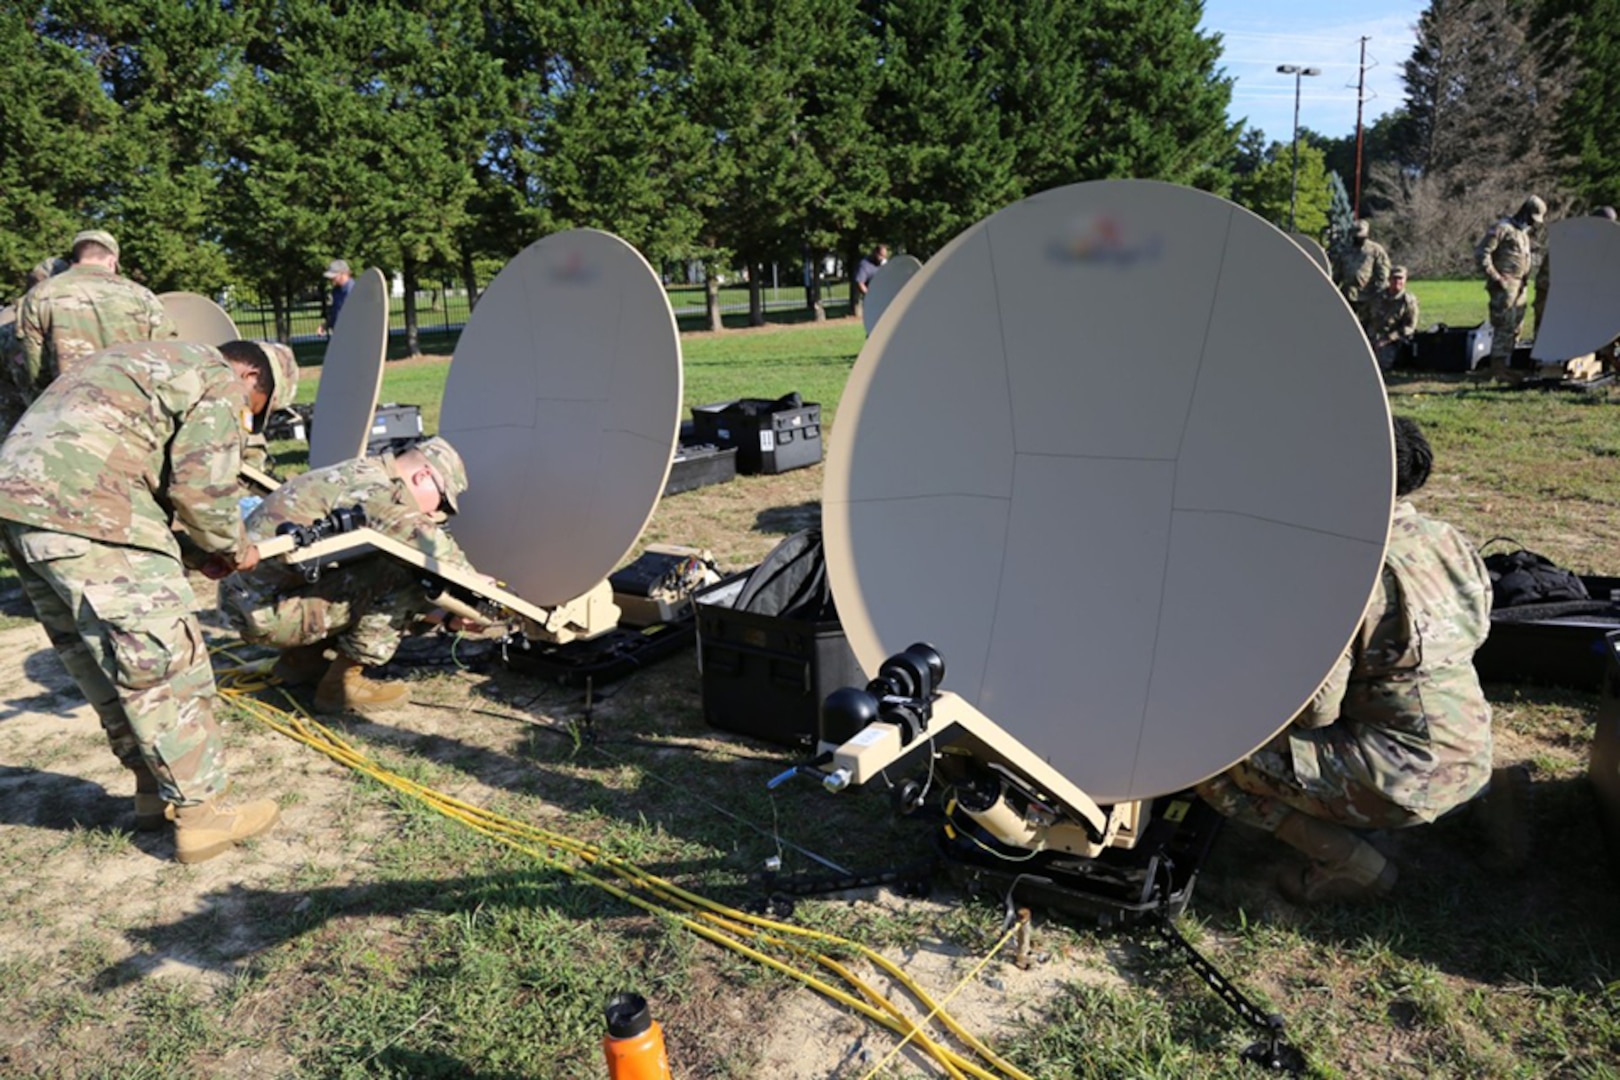 Soldiers from the Delaware Army National Guard 198th Expeditionary Signal Battalion-Enhanced (ESB-E) train on the Scalable Network Node, which is part of the unit’s modernized smaller, lighter, faster ESB-E equipment set, in New Castle Delaware, on August 9, 2022.